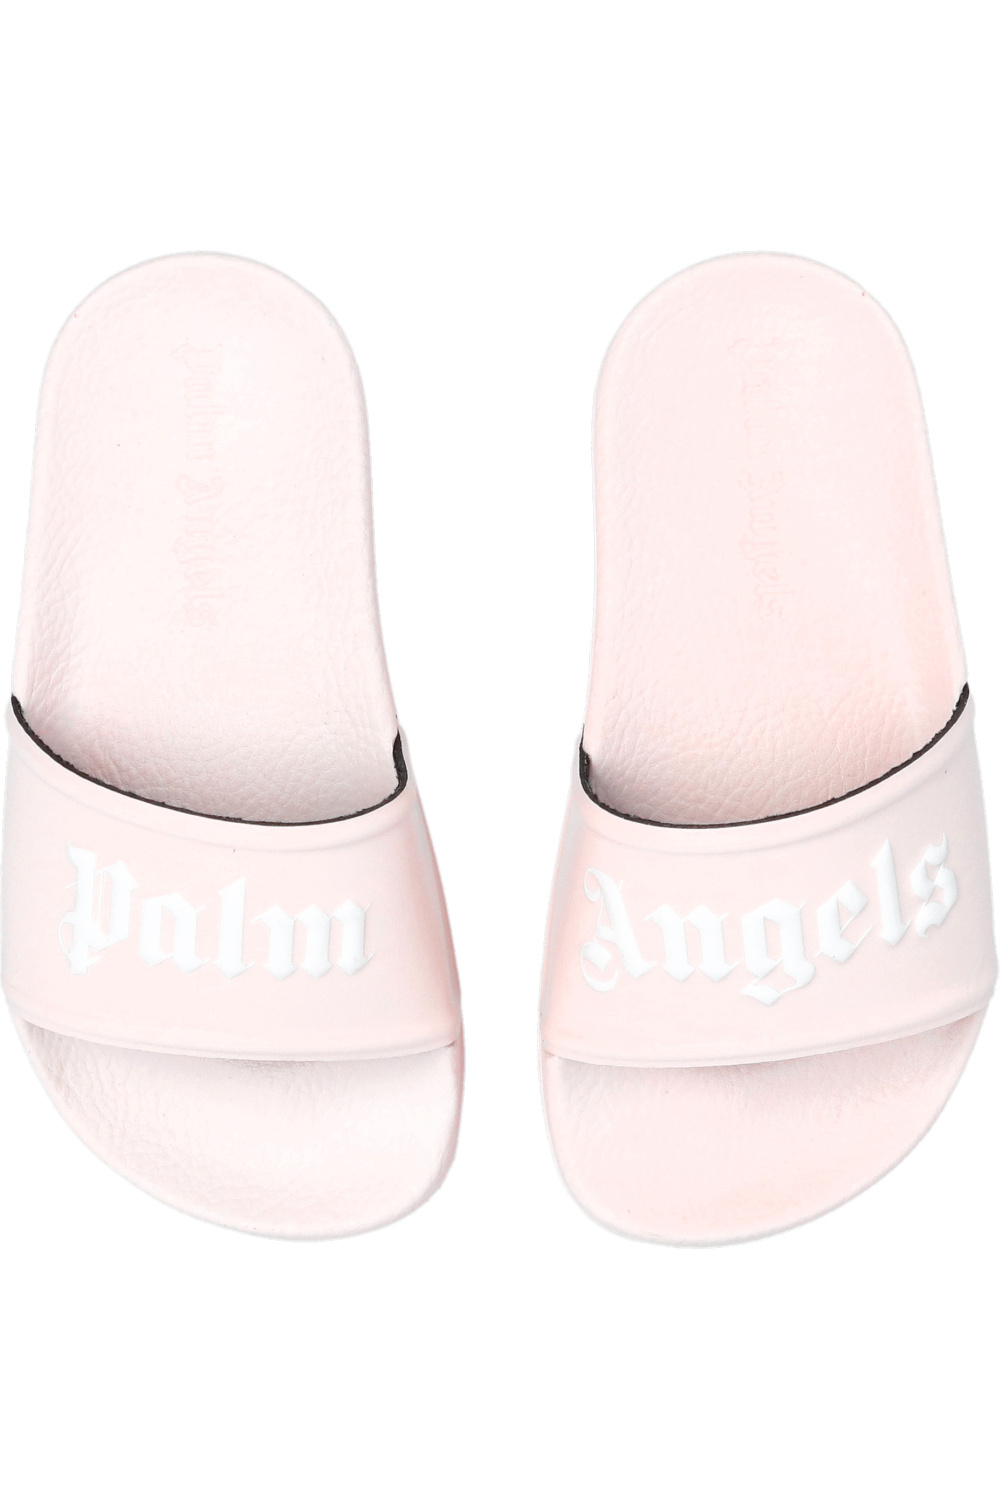 Palm Angels Kids koio shoes beverly hills hotel wallpaper